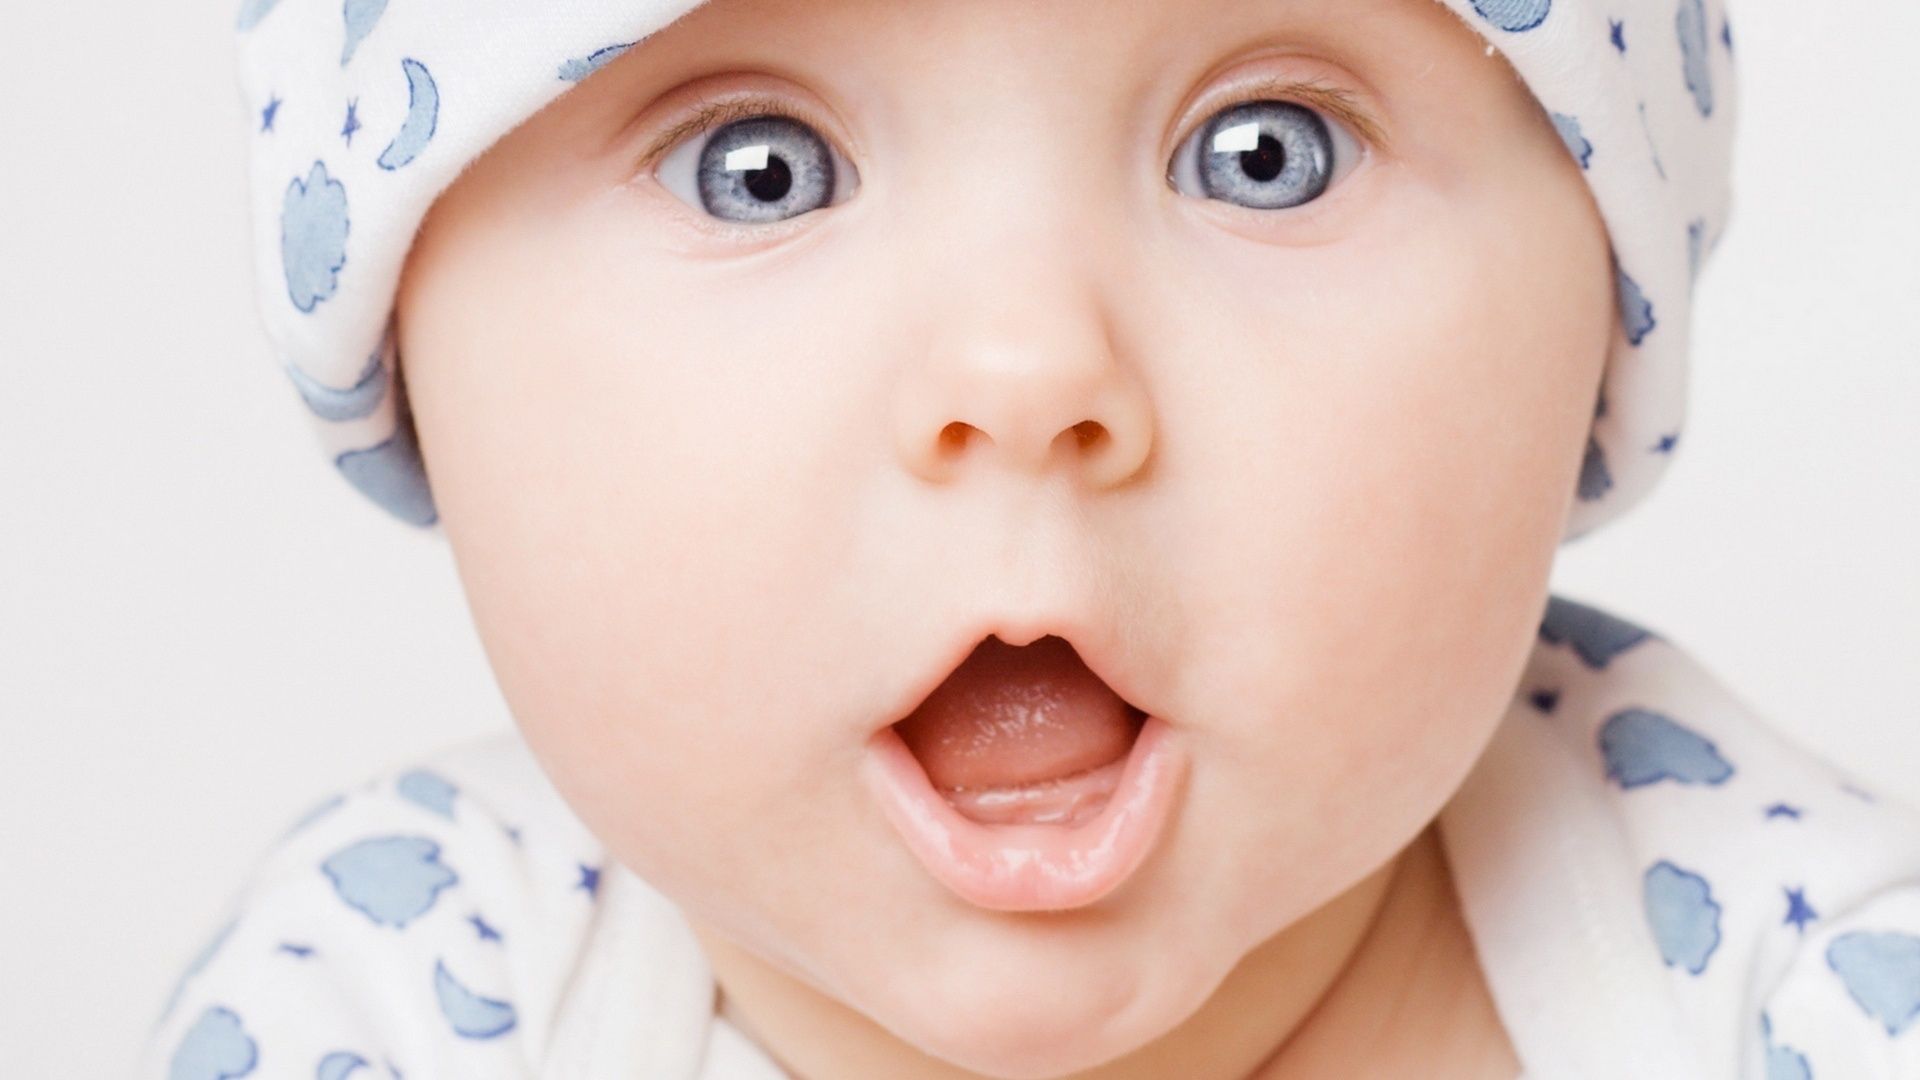 Cute Baby Smile Face | HD Cute Wallpapers for Mobile and Desktop